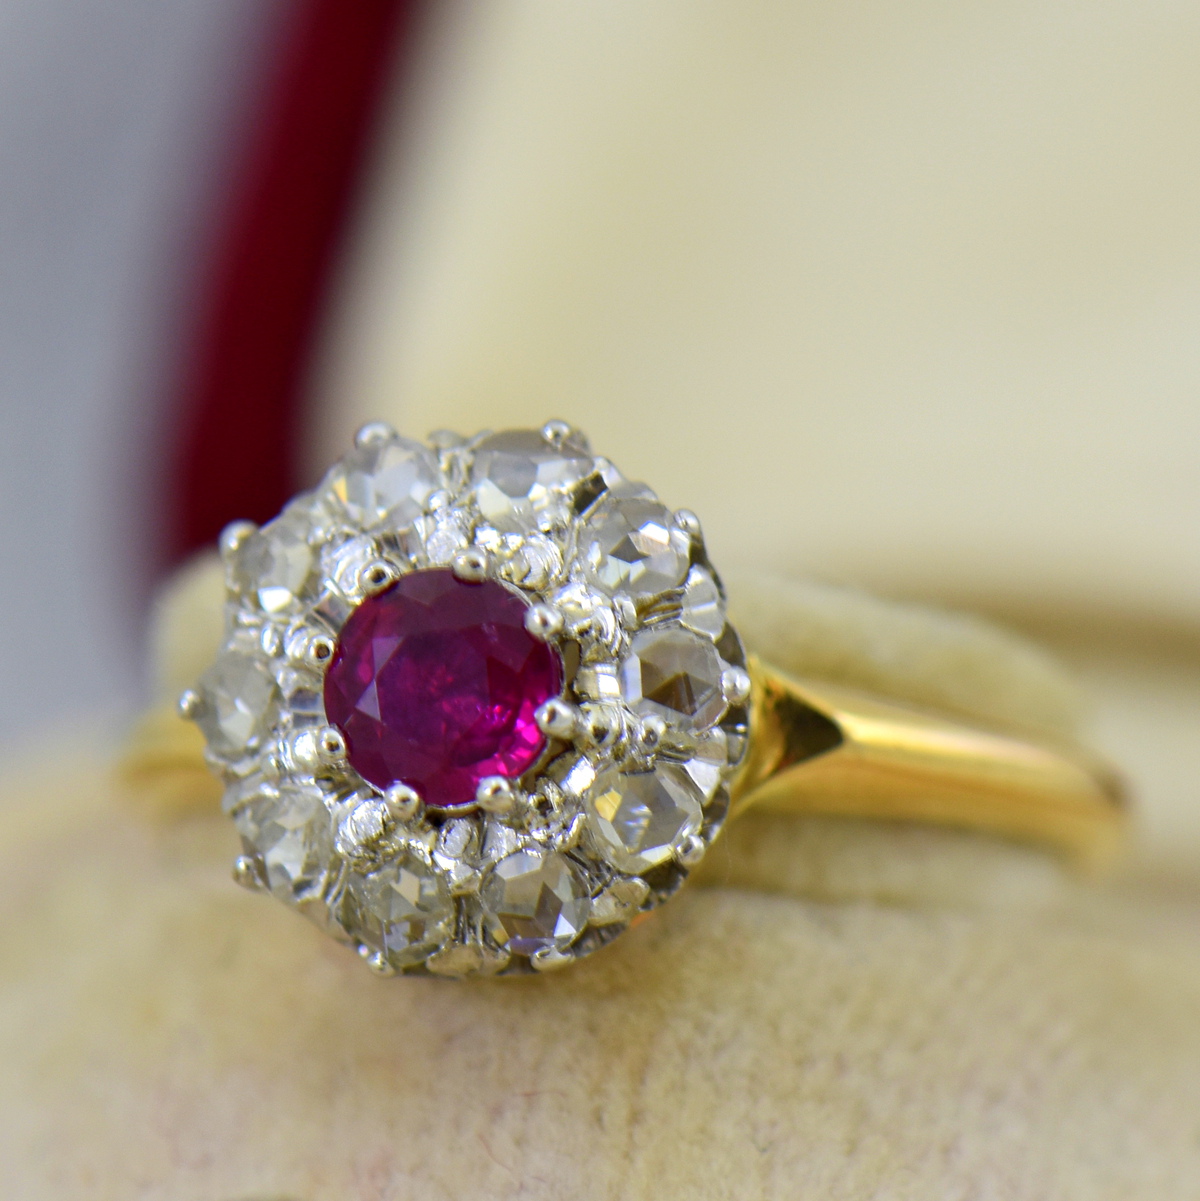 1.5ct Red Ruby Engagement Ring Set 14K Yellow Gold Vintage Ruby Ring  Antique Floral Diamond Matching Band Birthstone Ring Anniversary Gifts -  Etsy